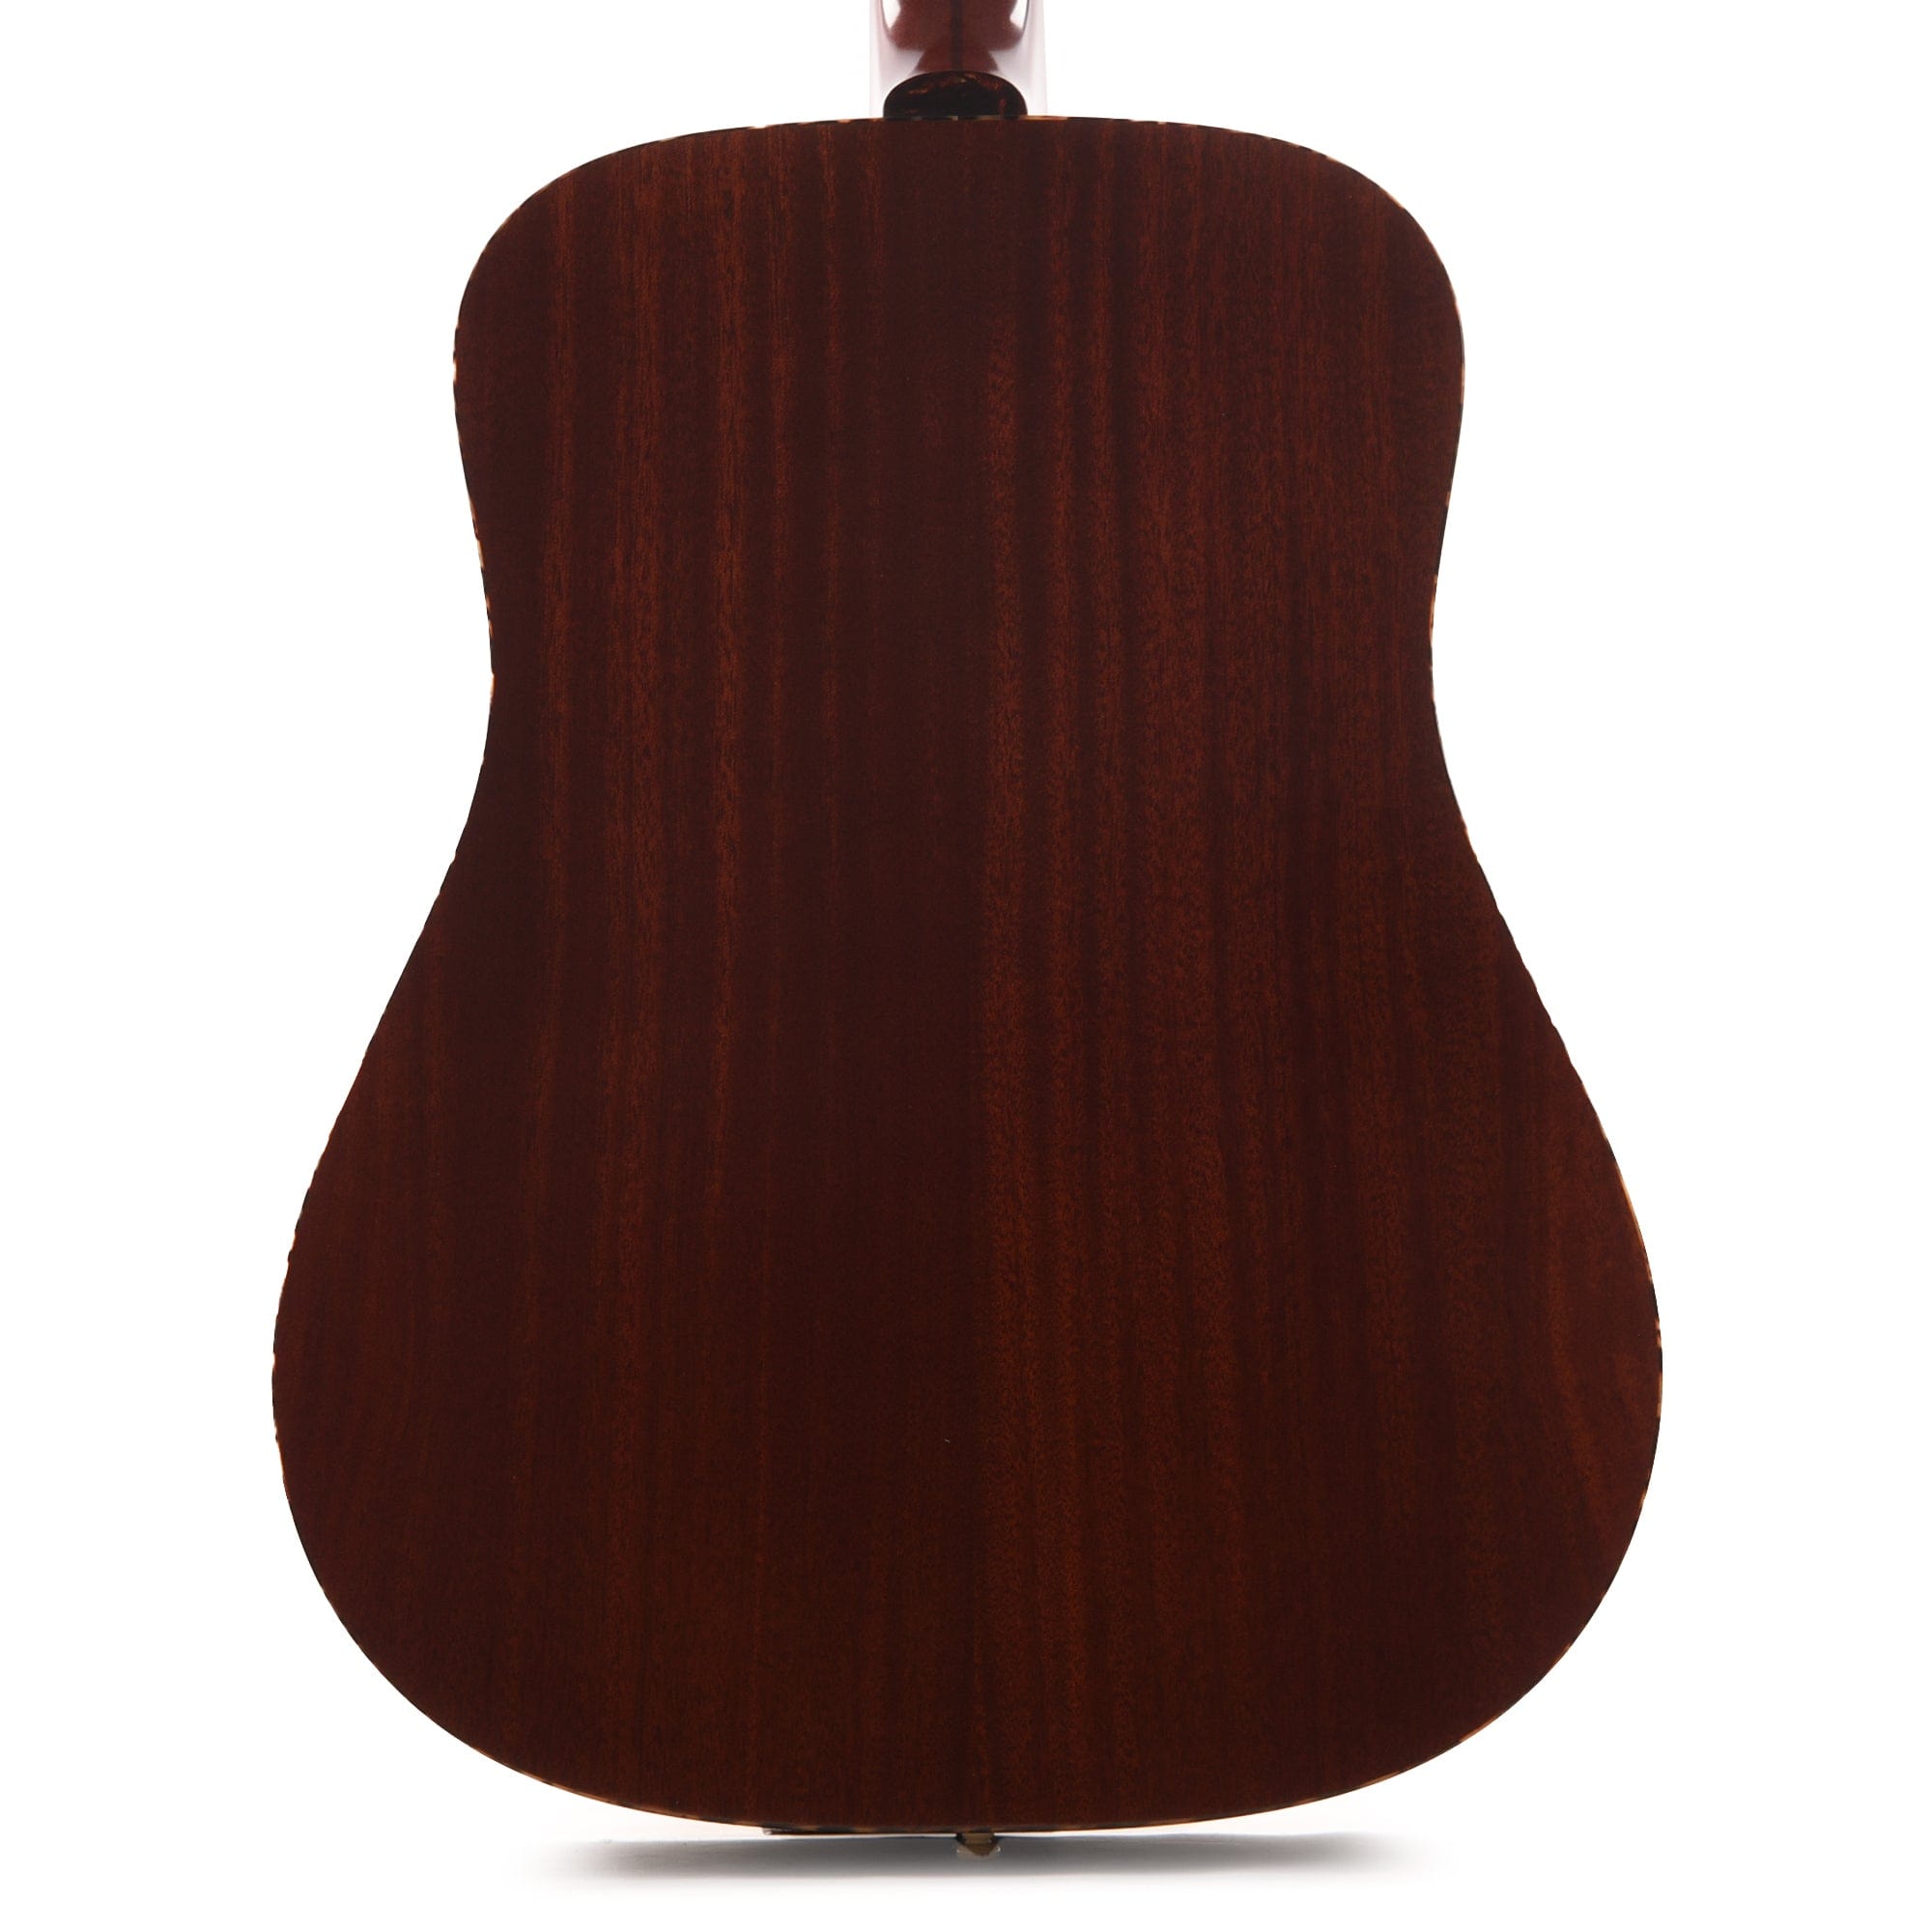 Guild USA Special Run D-40 Traditional Natural Burst Vintage Gloss Acoustic Guitars / Dreadnought